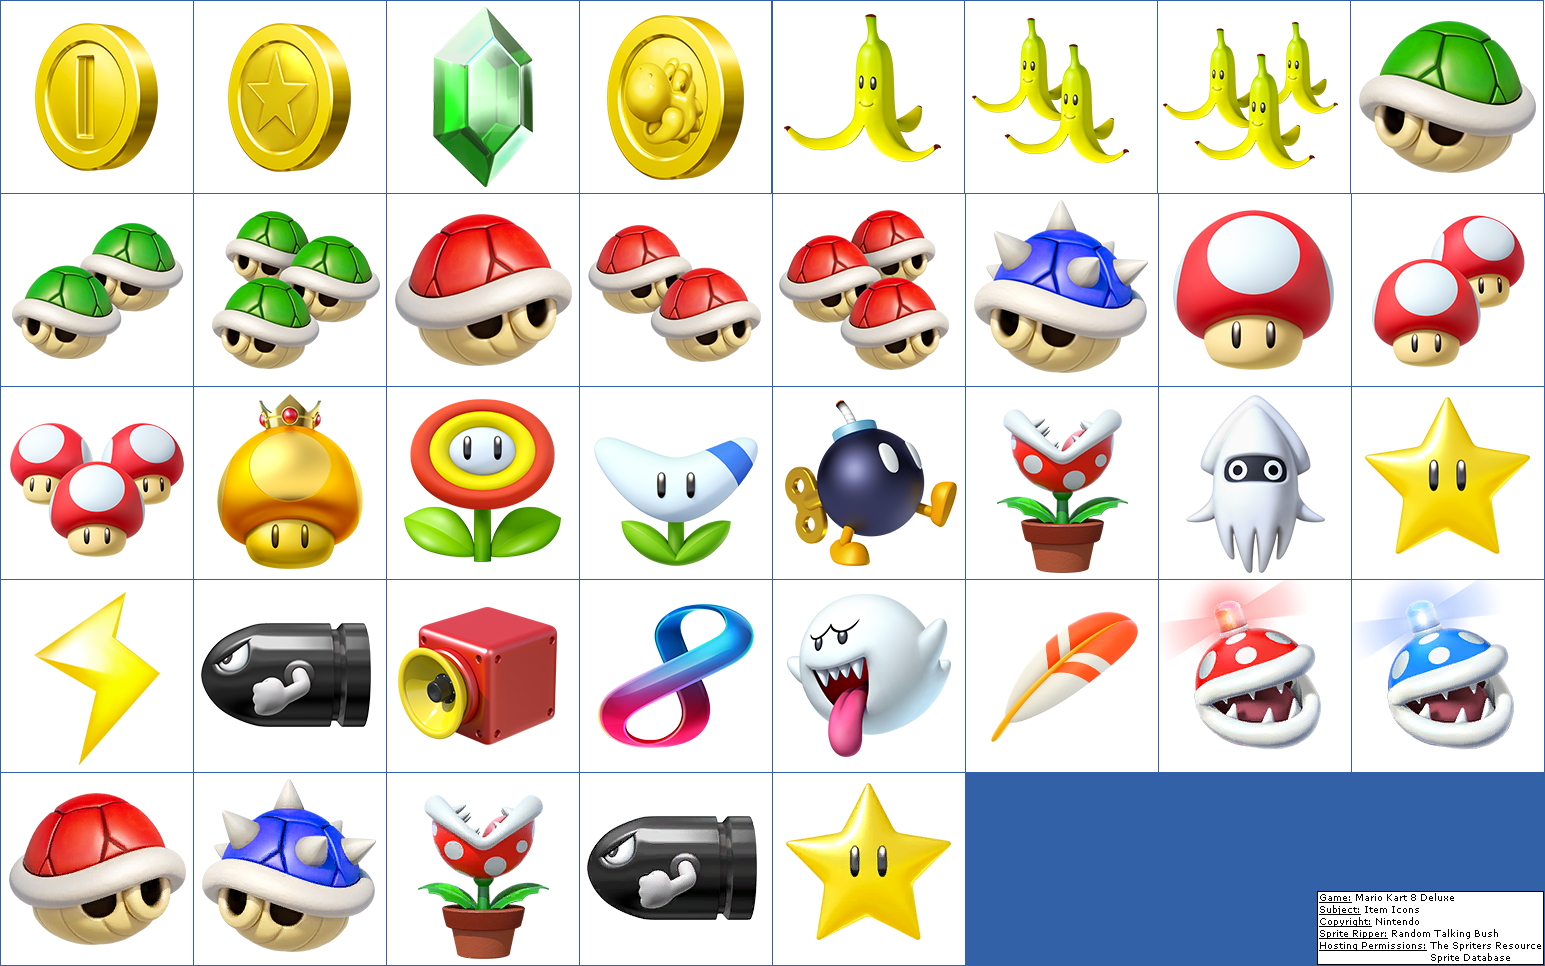 The Spriters Resource Full Sheet View Mario Kart 8 Deluxe Item Icons 3040